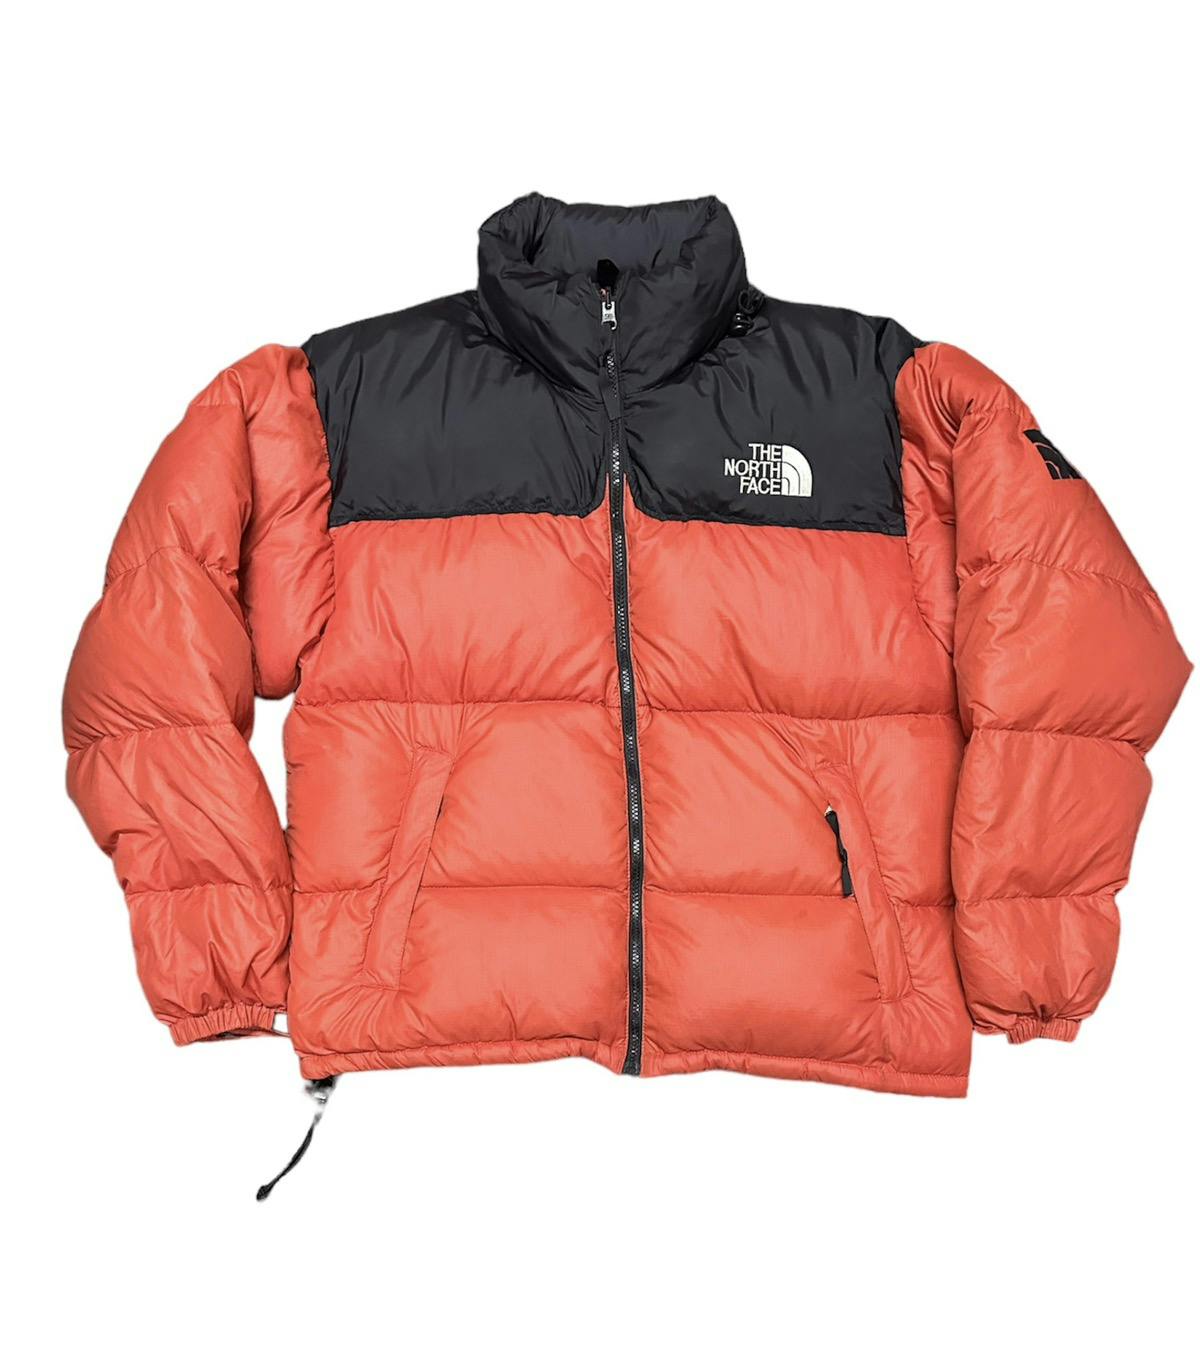 The north face puffer jacket - 1